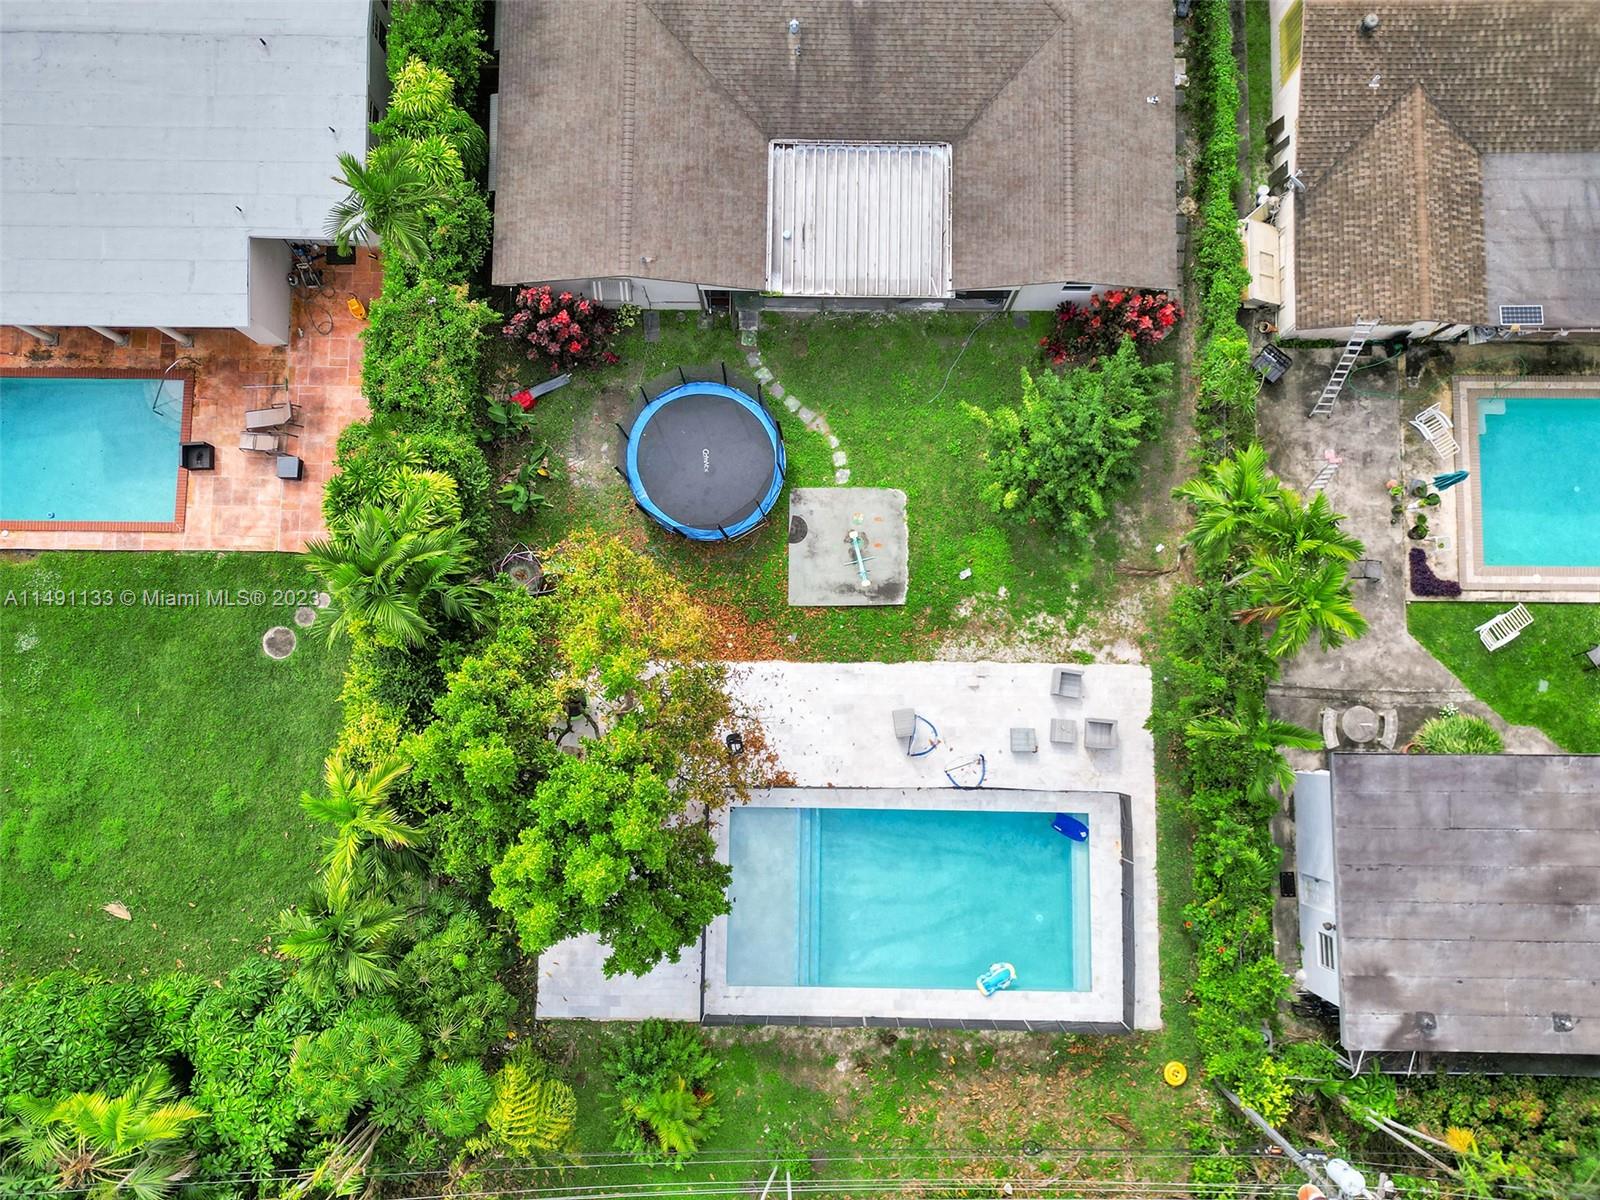 an aerial view of a house with a yard and a garden